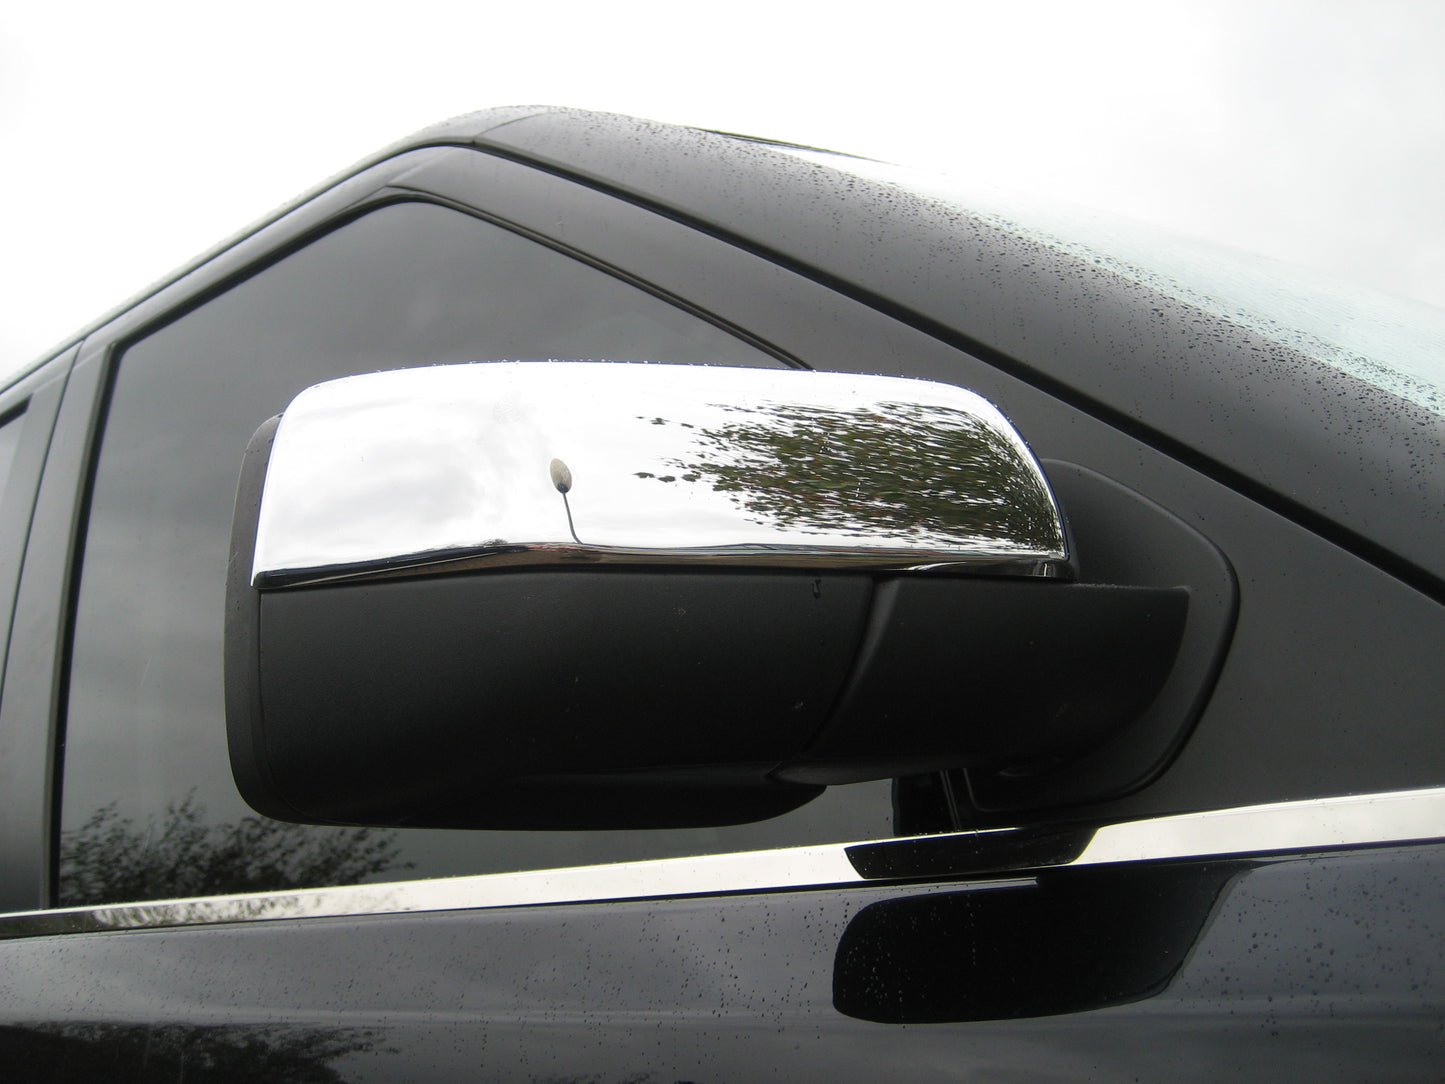 Replacement Top Mirror Caps for Range Rover Sport 2010 on - Chrome